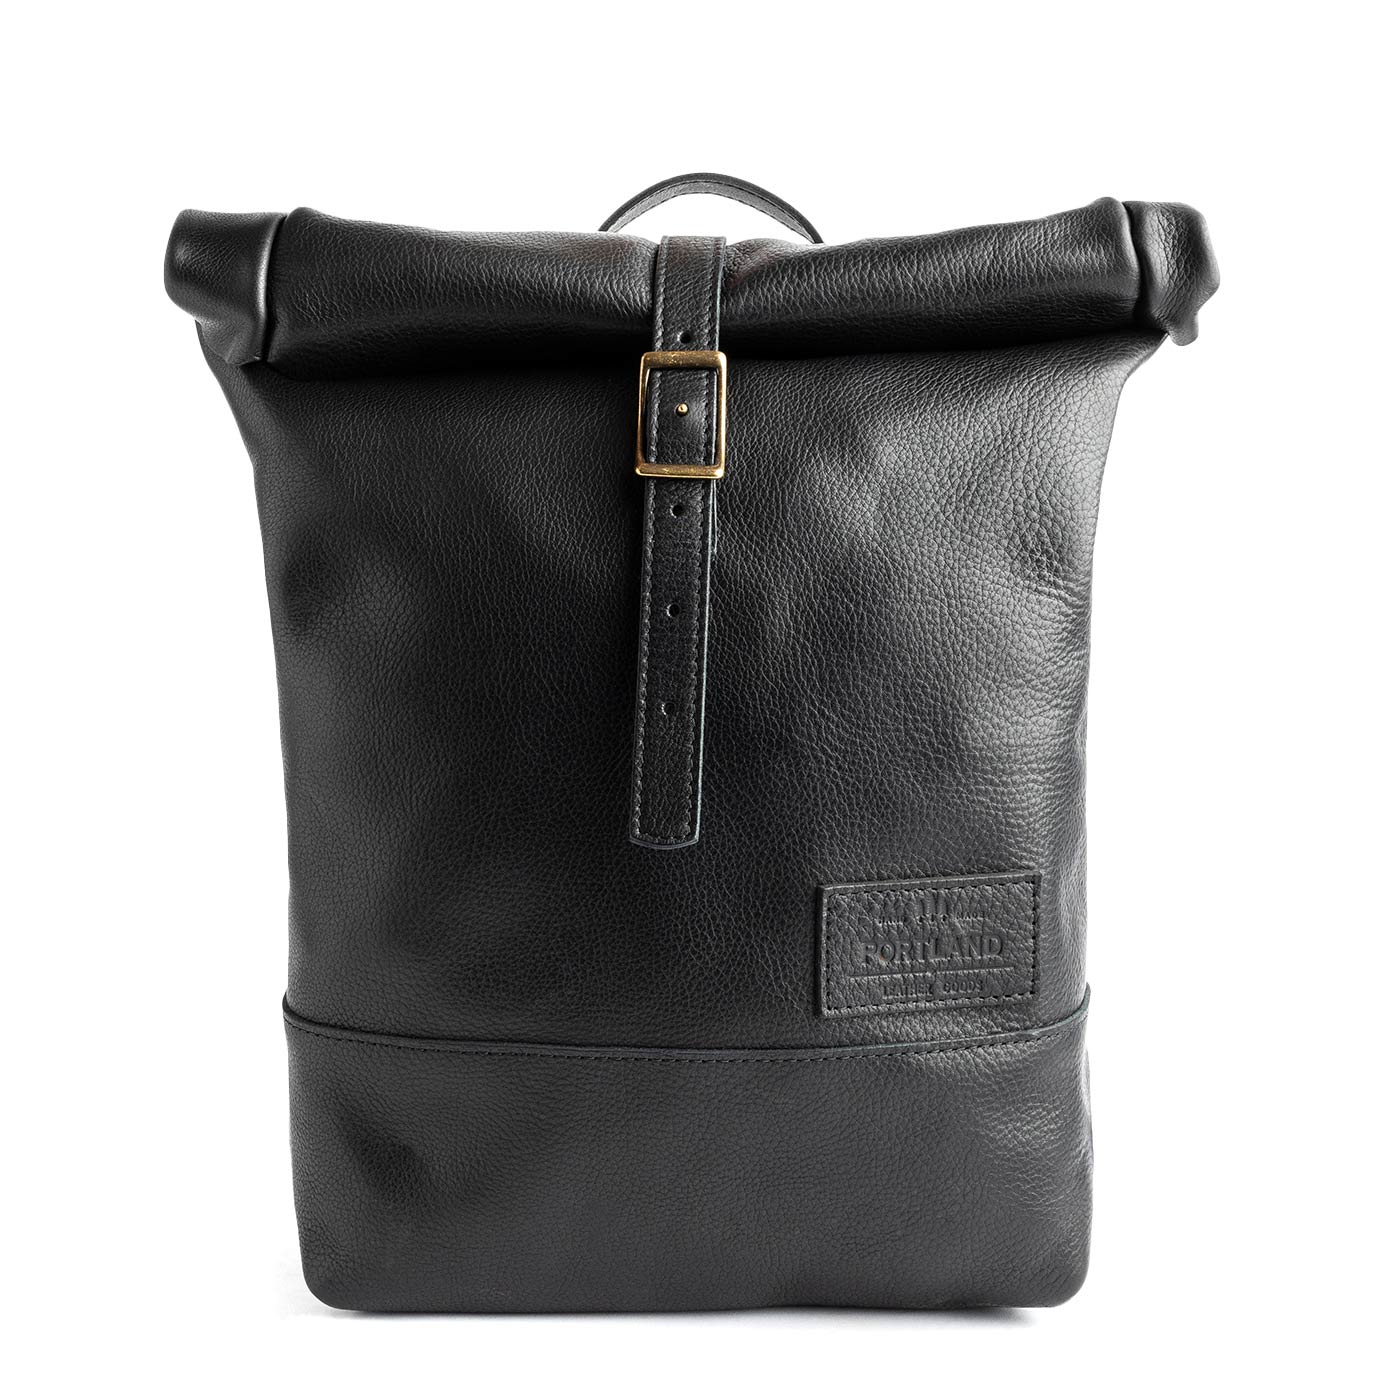 Quality Strong Black Roll Top Leather Backpack